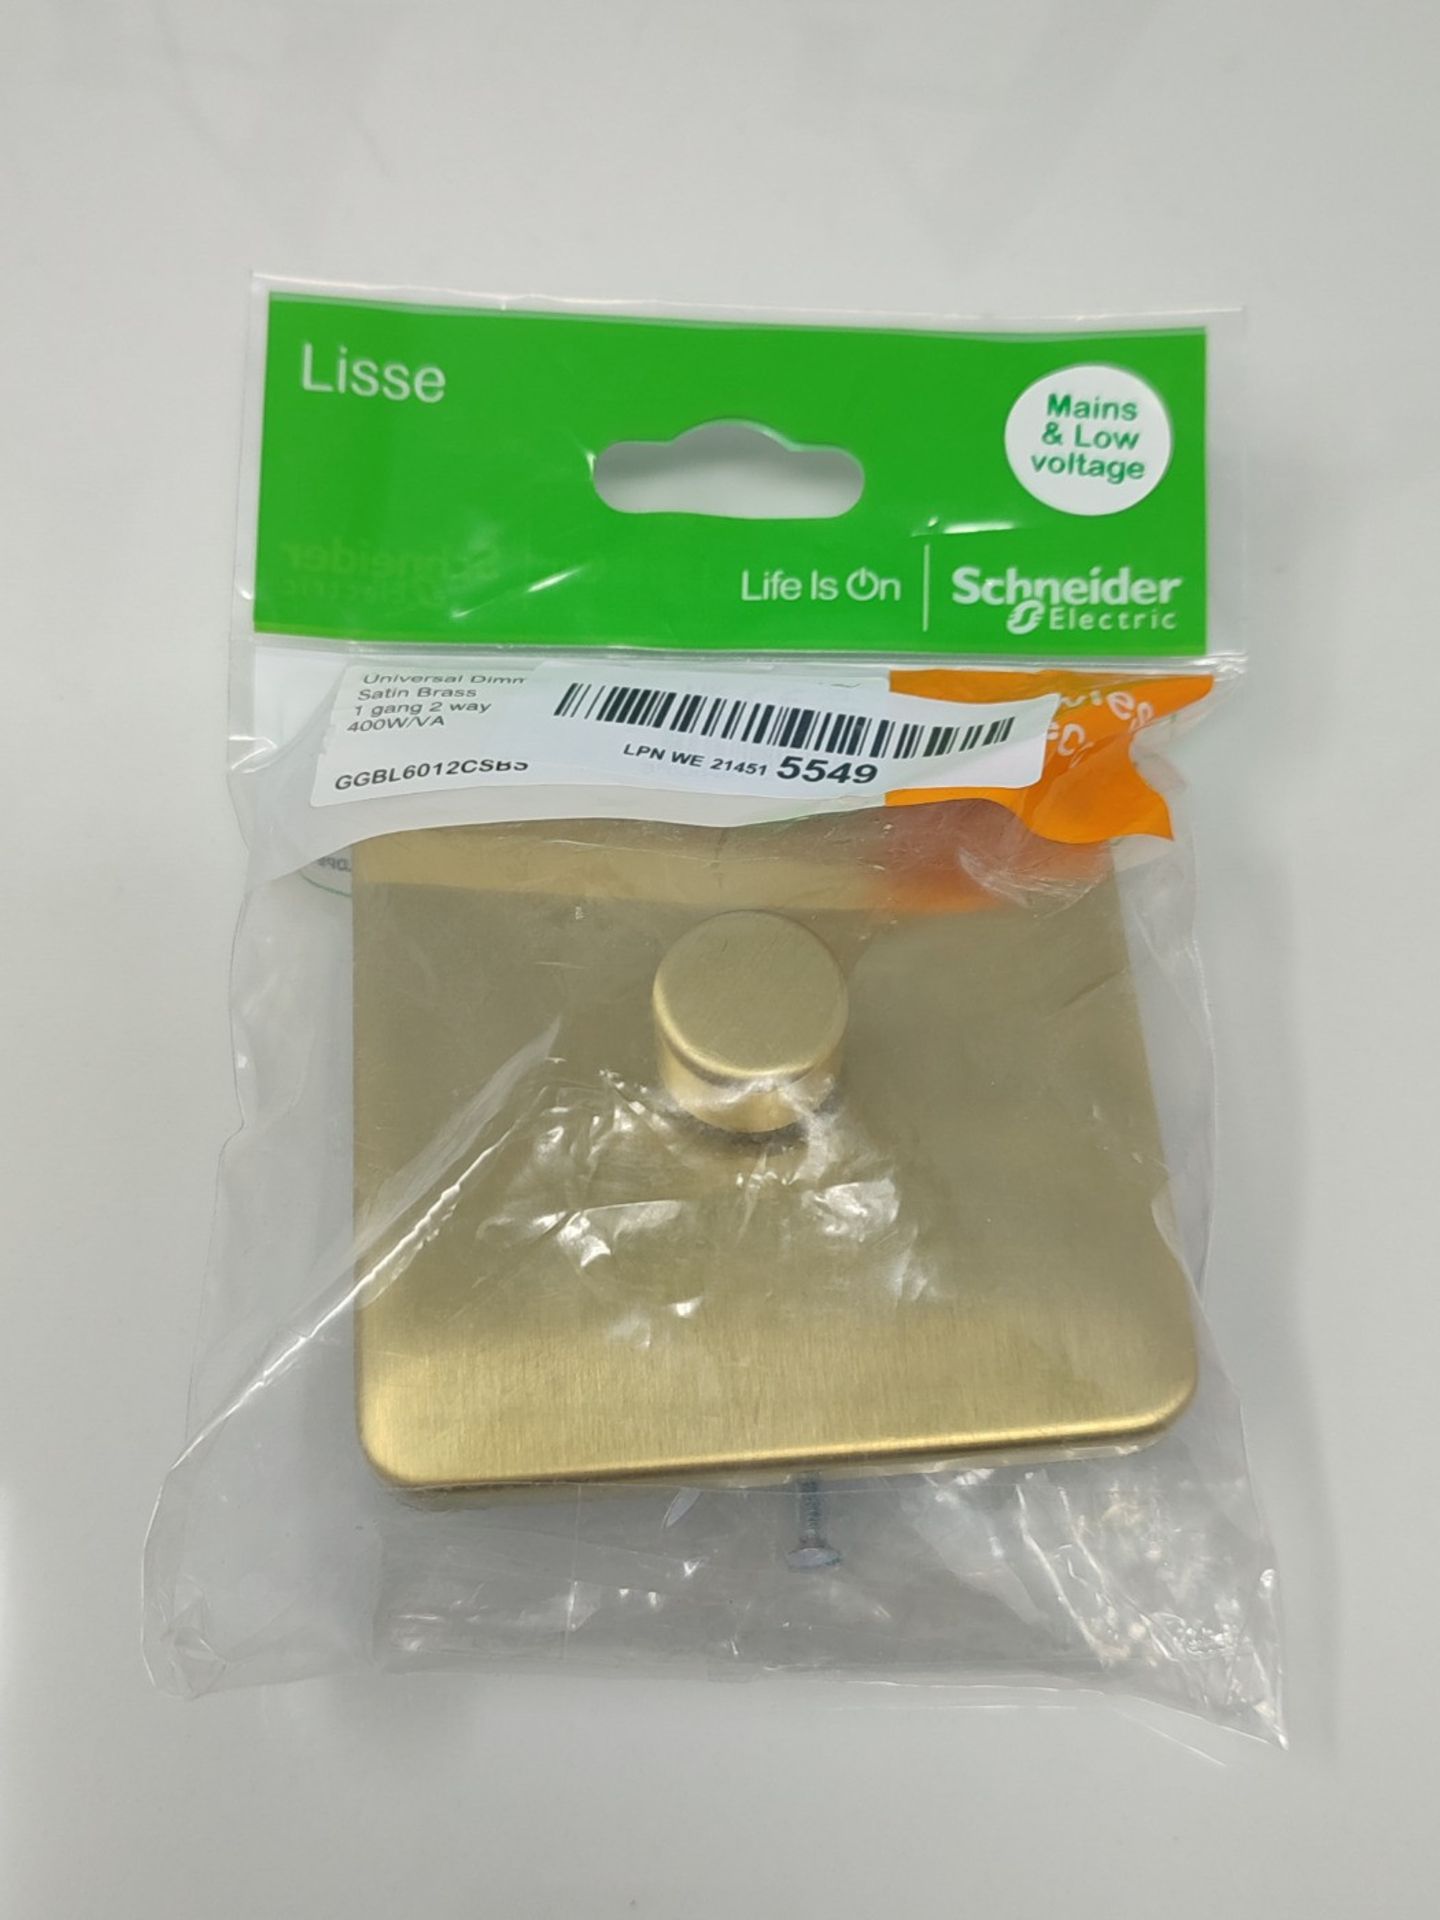 Schneider Electric Lisse Screwless Deco - Single Universal 2 Way Dimmer Light Switch, - Image 3 of 3